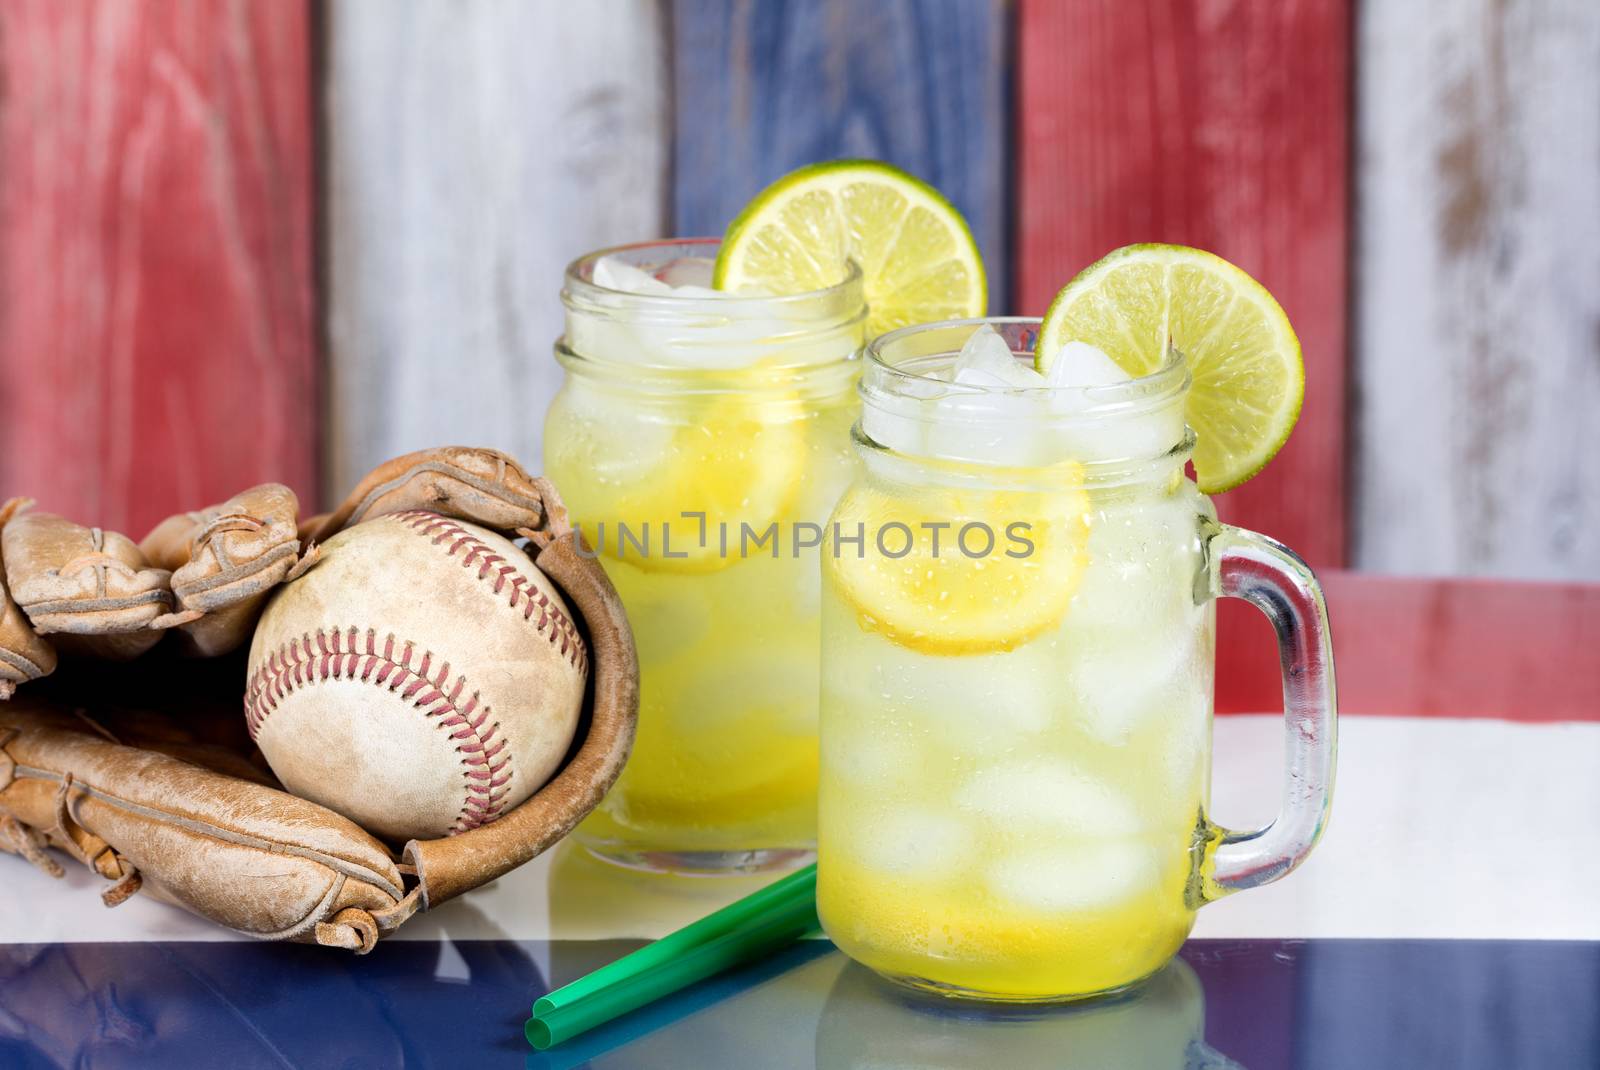 Close up of a glasses filled with cold lemonade with baseball glove and ball.  Faded wooden boards painted red, white and blue in background. Selective focus on upper front jar glass with lime slice. 